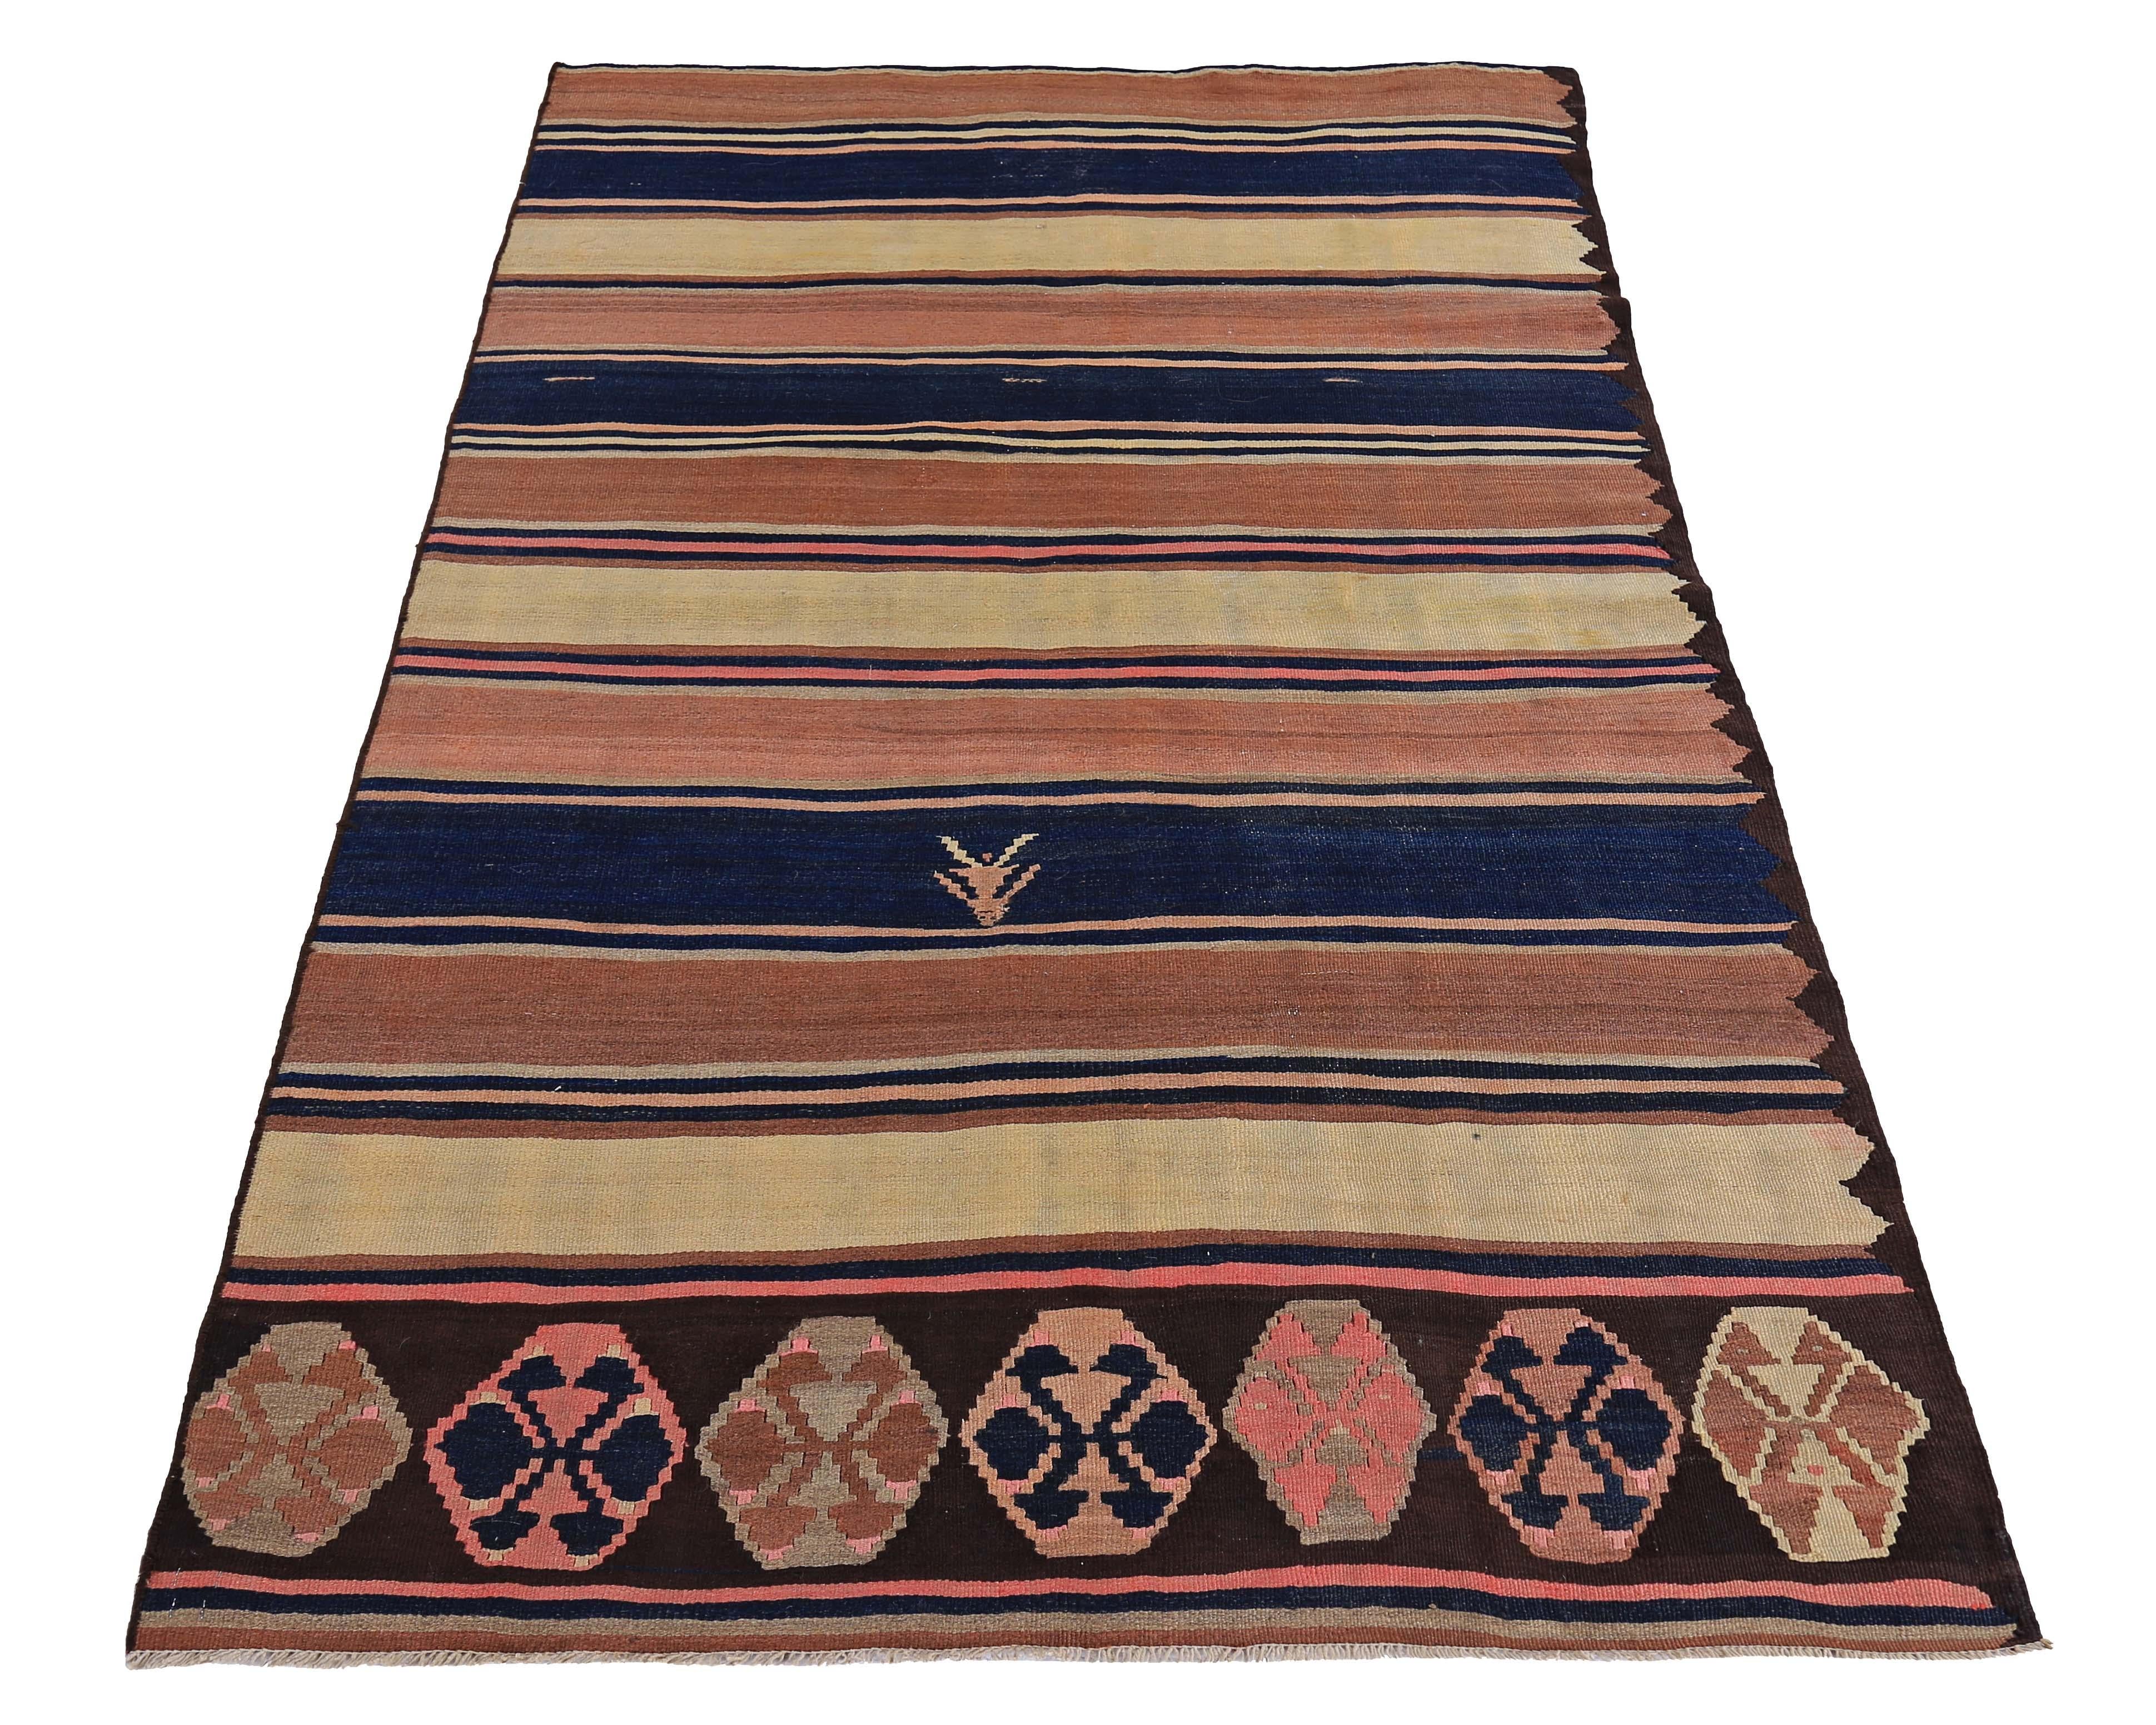 Modern Turkish rug handwoven from the finest sheep’s wool and colored with all-natural vegetable dyes that are safe for humans and pets. It’s a traditional Kilim flat-weave design featuring a brown, yellow and navy stripes. It’s a stunning piece to